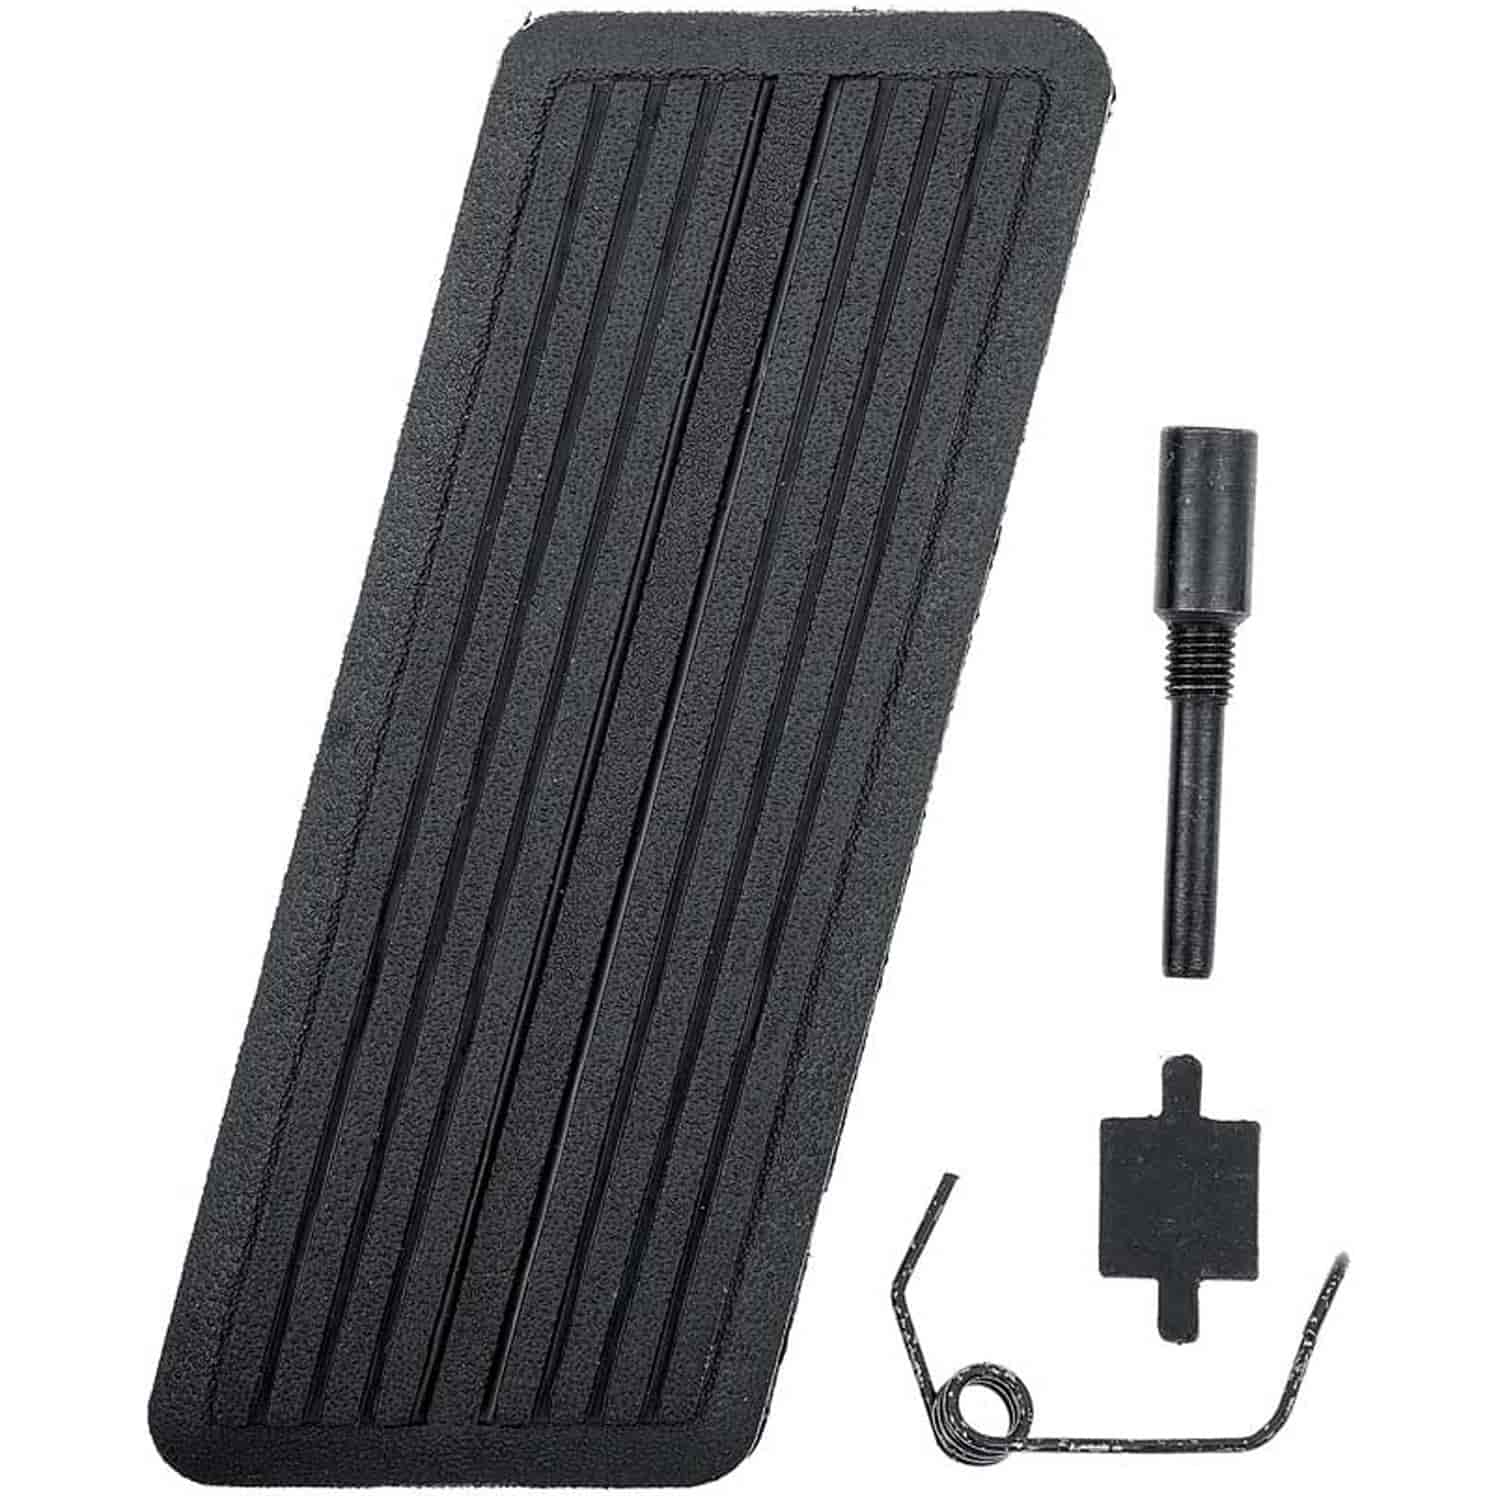 Accelerator Pedal Pad With Hardware 1971-1972 Mopar A/B/E-Body Includes Pedal Pad, Spring & Pin